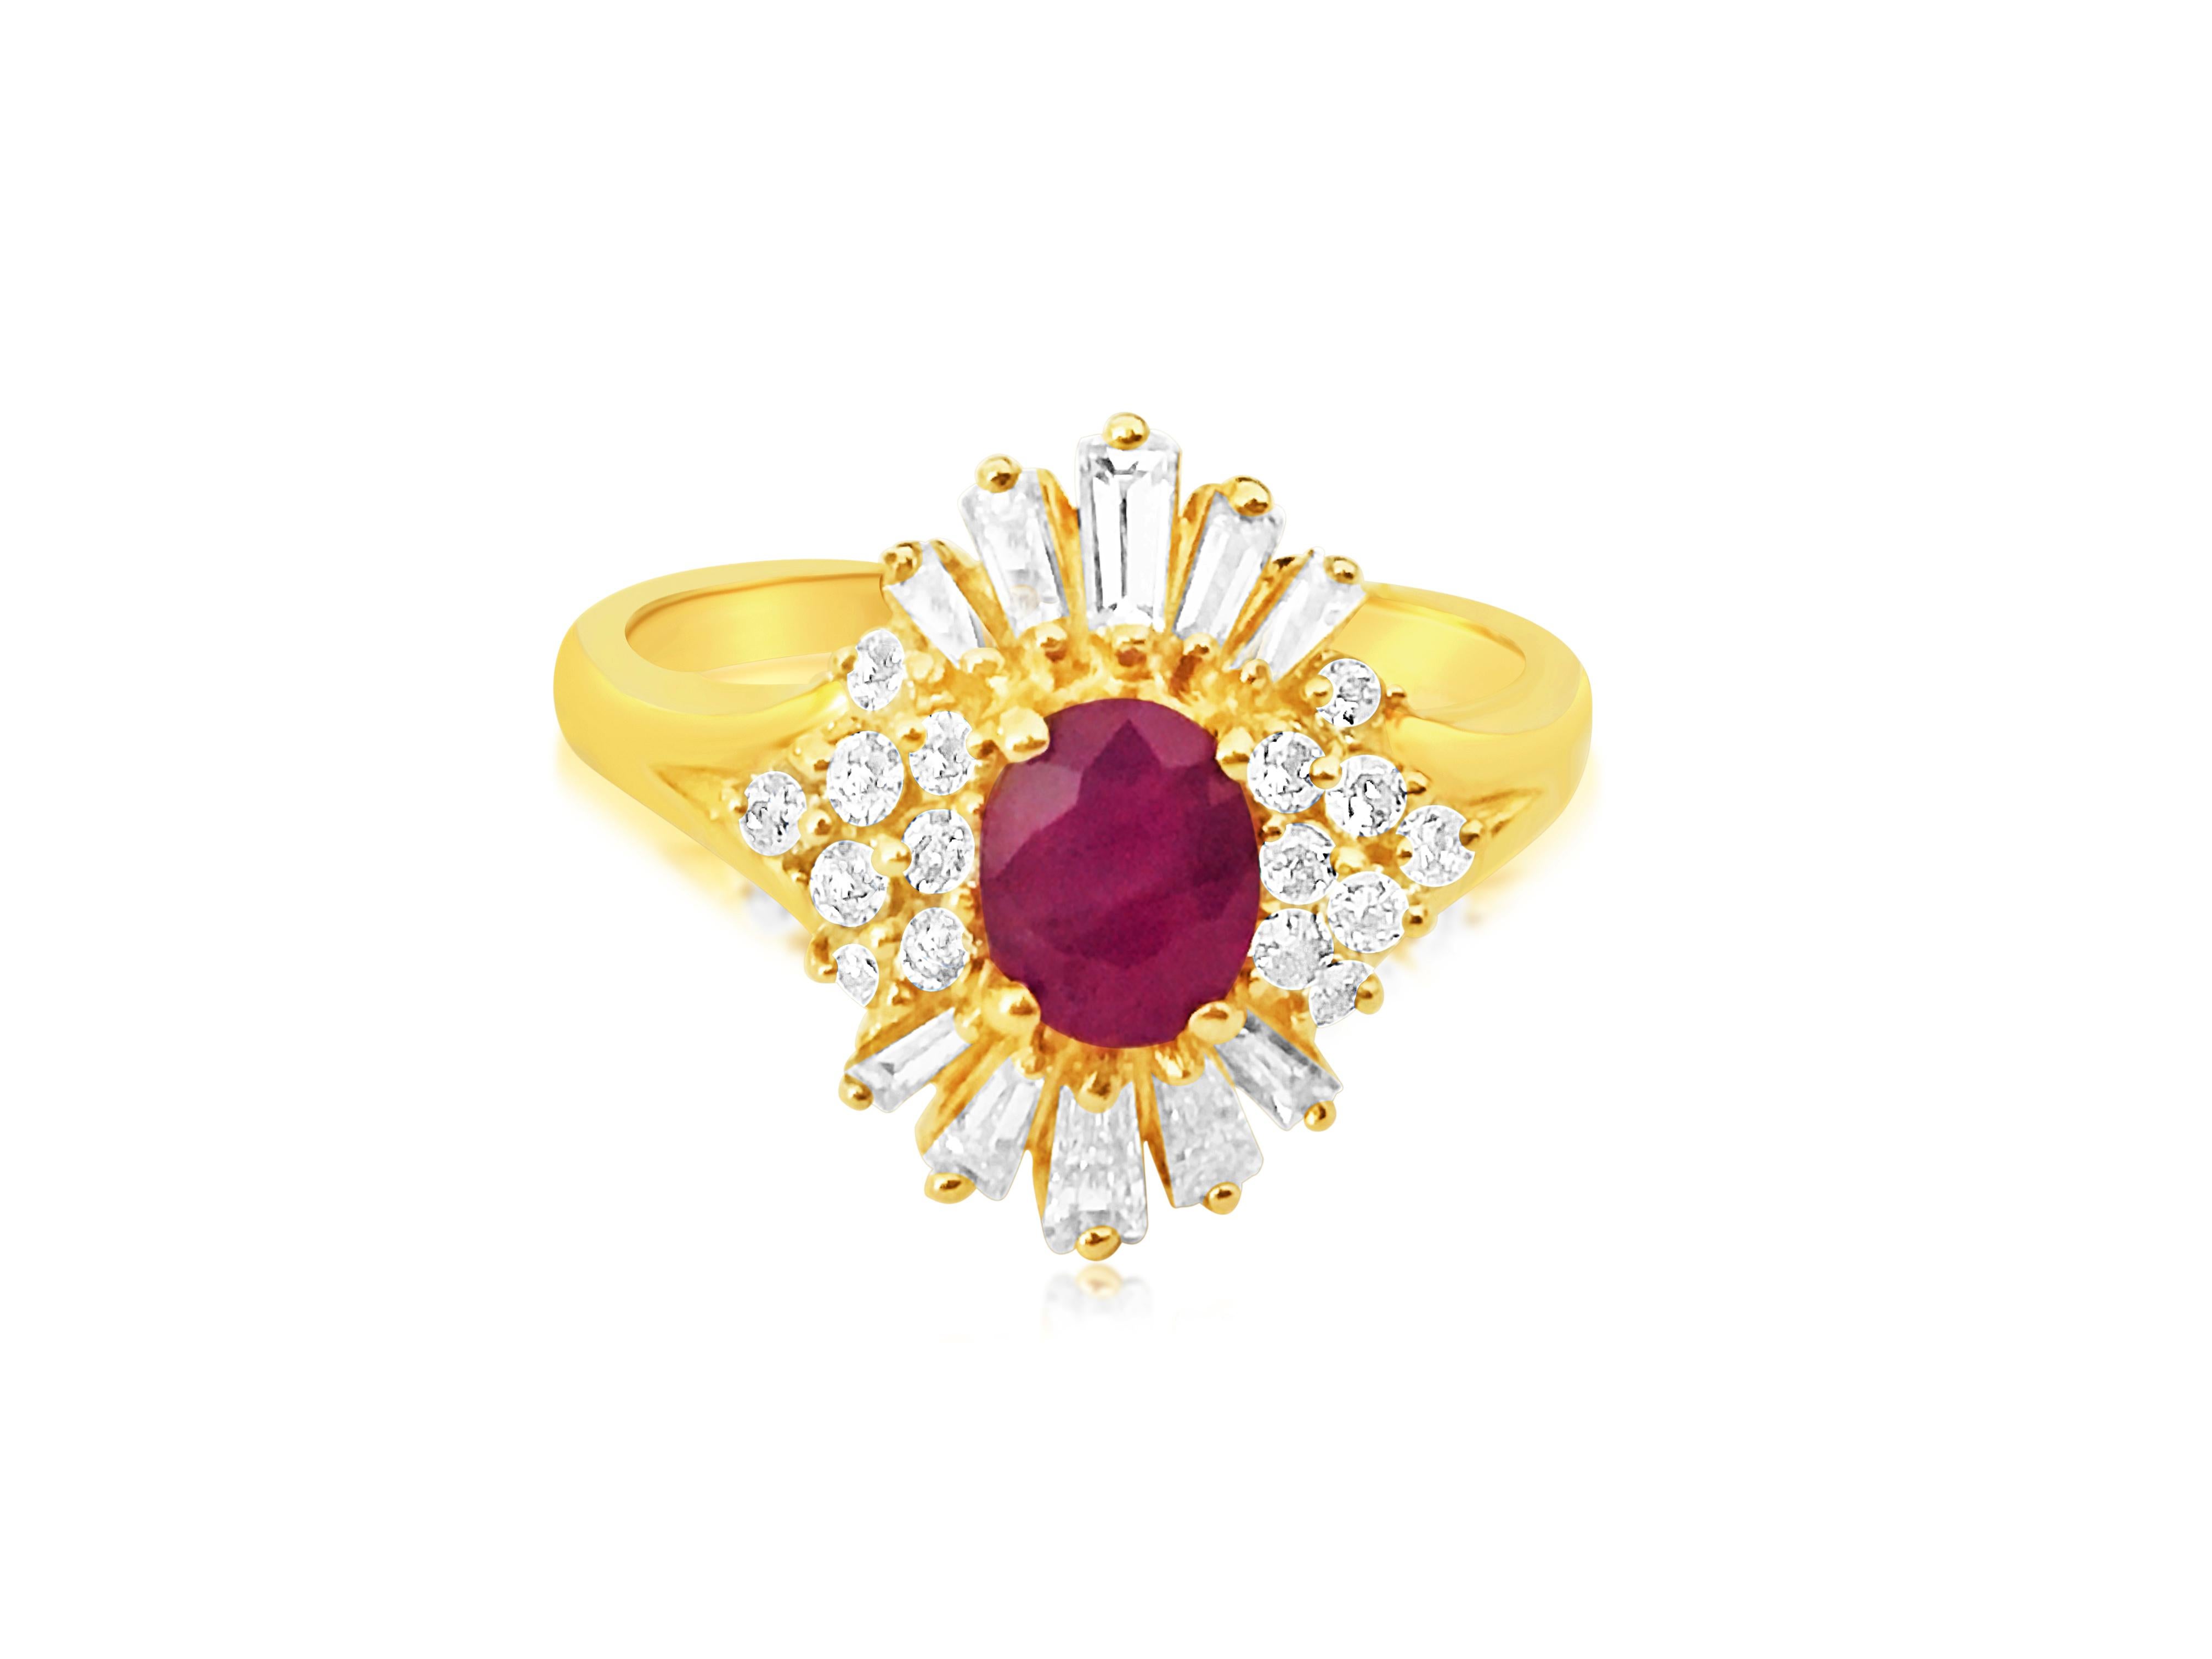 This is a pretty ring made of solid 14-karat yellow gold. It has a 1-carat oval-shaped ruby, securely set in prongs. The ruby is 100% natural and hasn't been treated with heat. The diamonds on the ring add up to 0.75 carats. They are of high quality